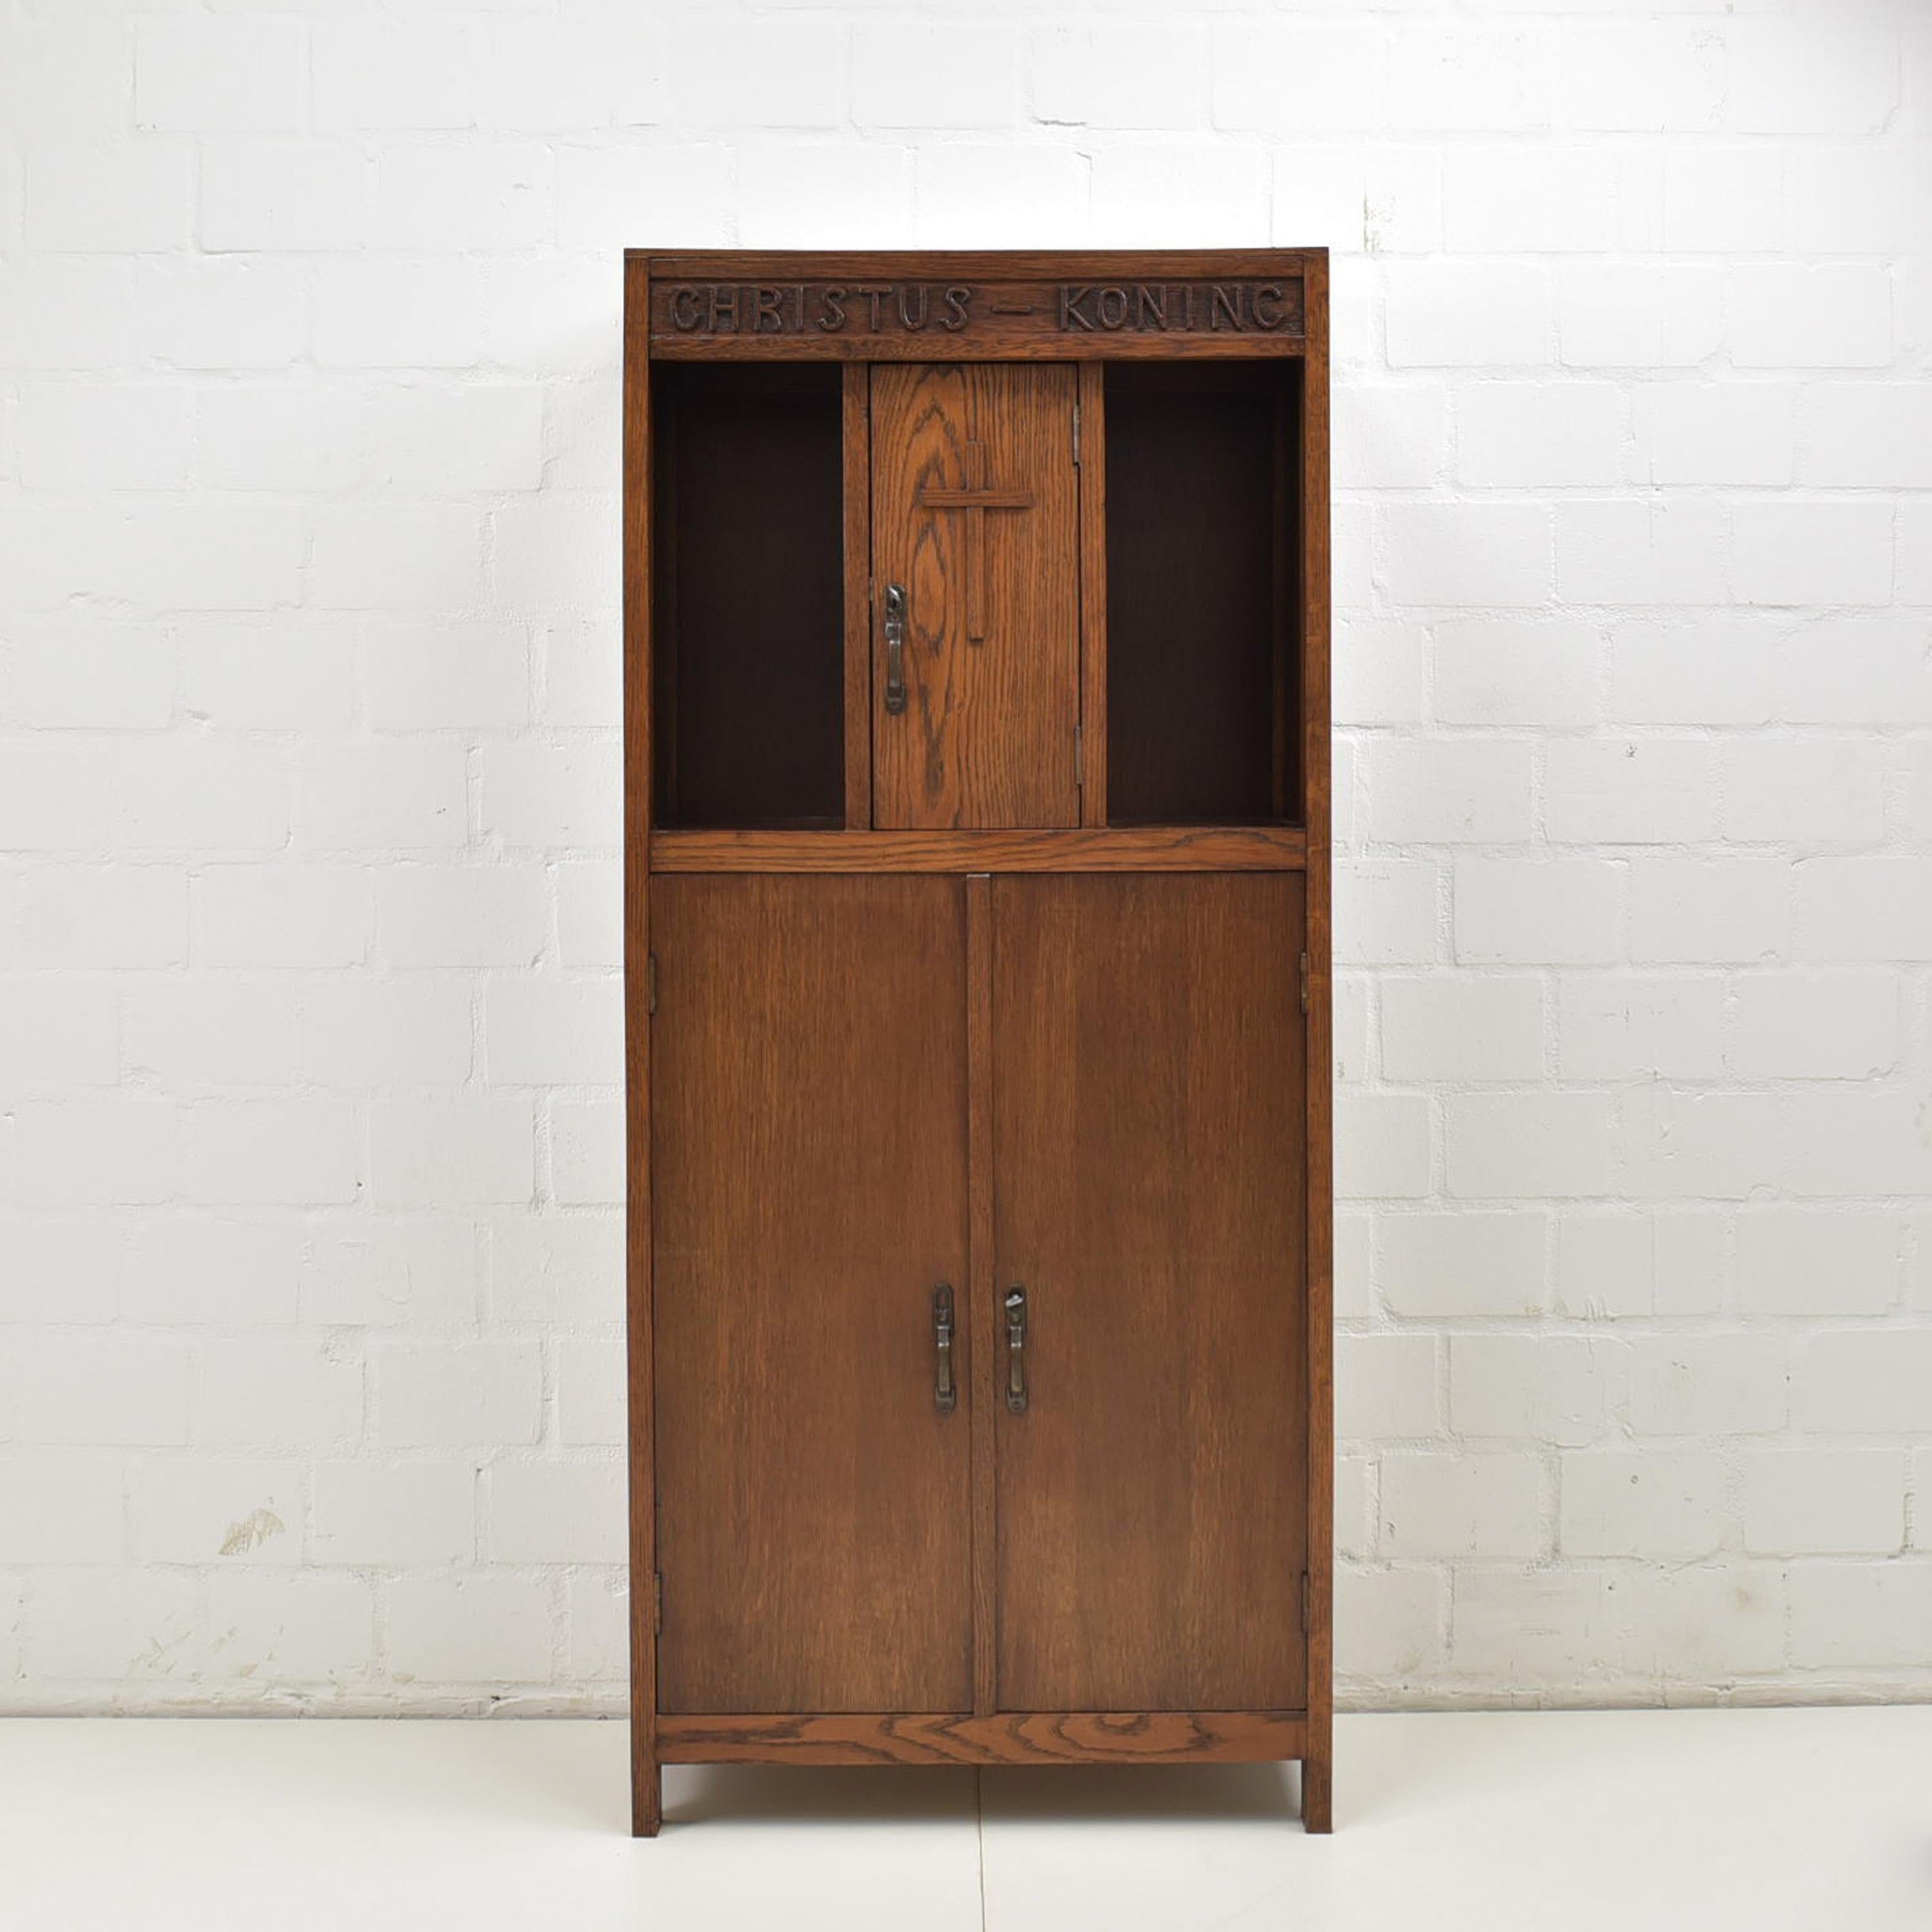 Narrow Christian cabinet restored 1930 Oak Vertiko Christkönig

Features:
Narrow model with two doors and three shelves below and three compartments, one with a door, above
Upper door with Jesus cross
Carved inscription 